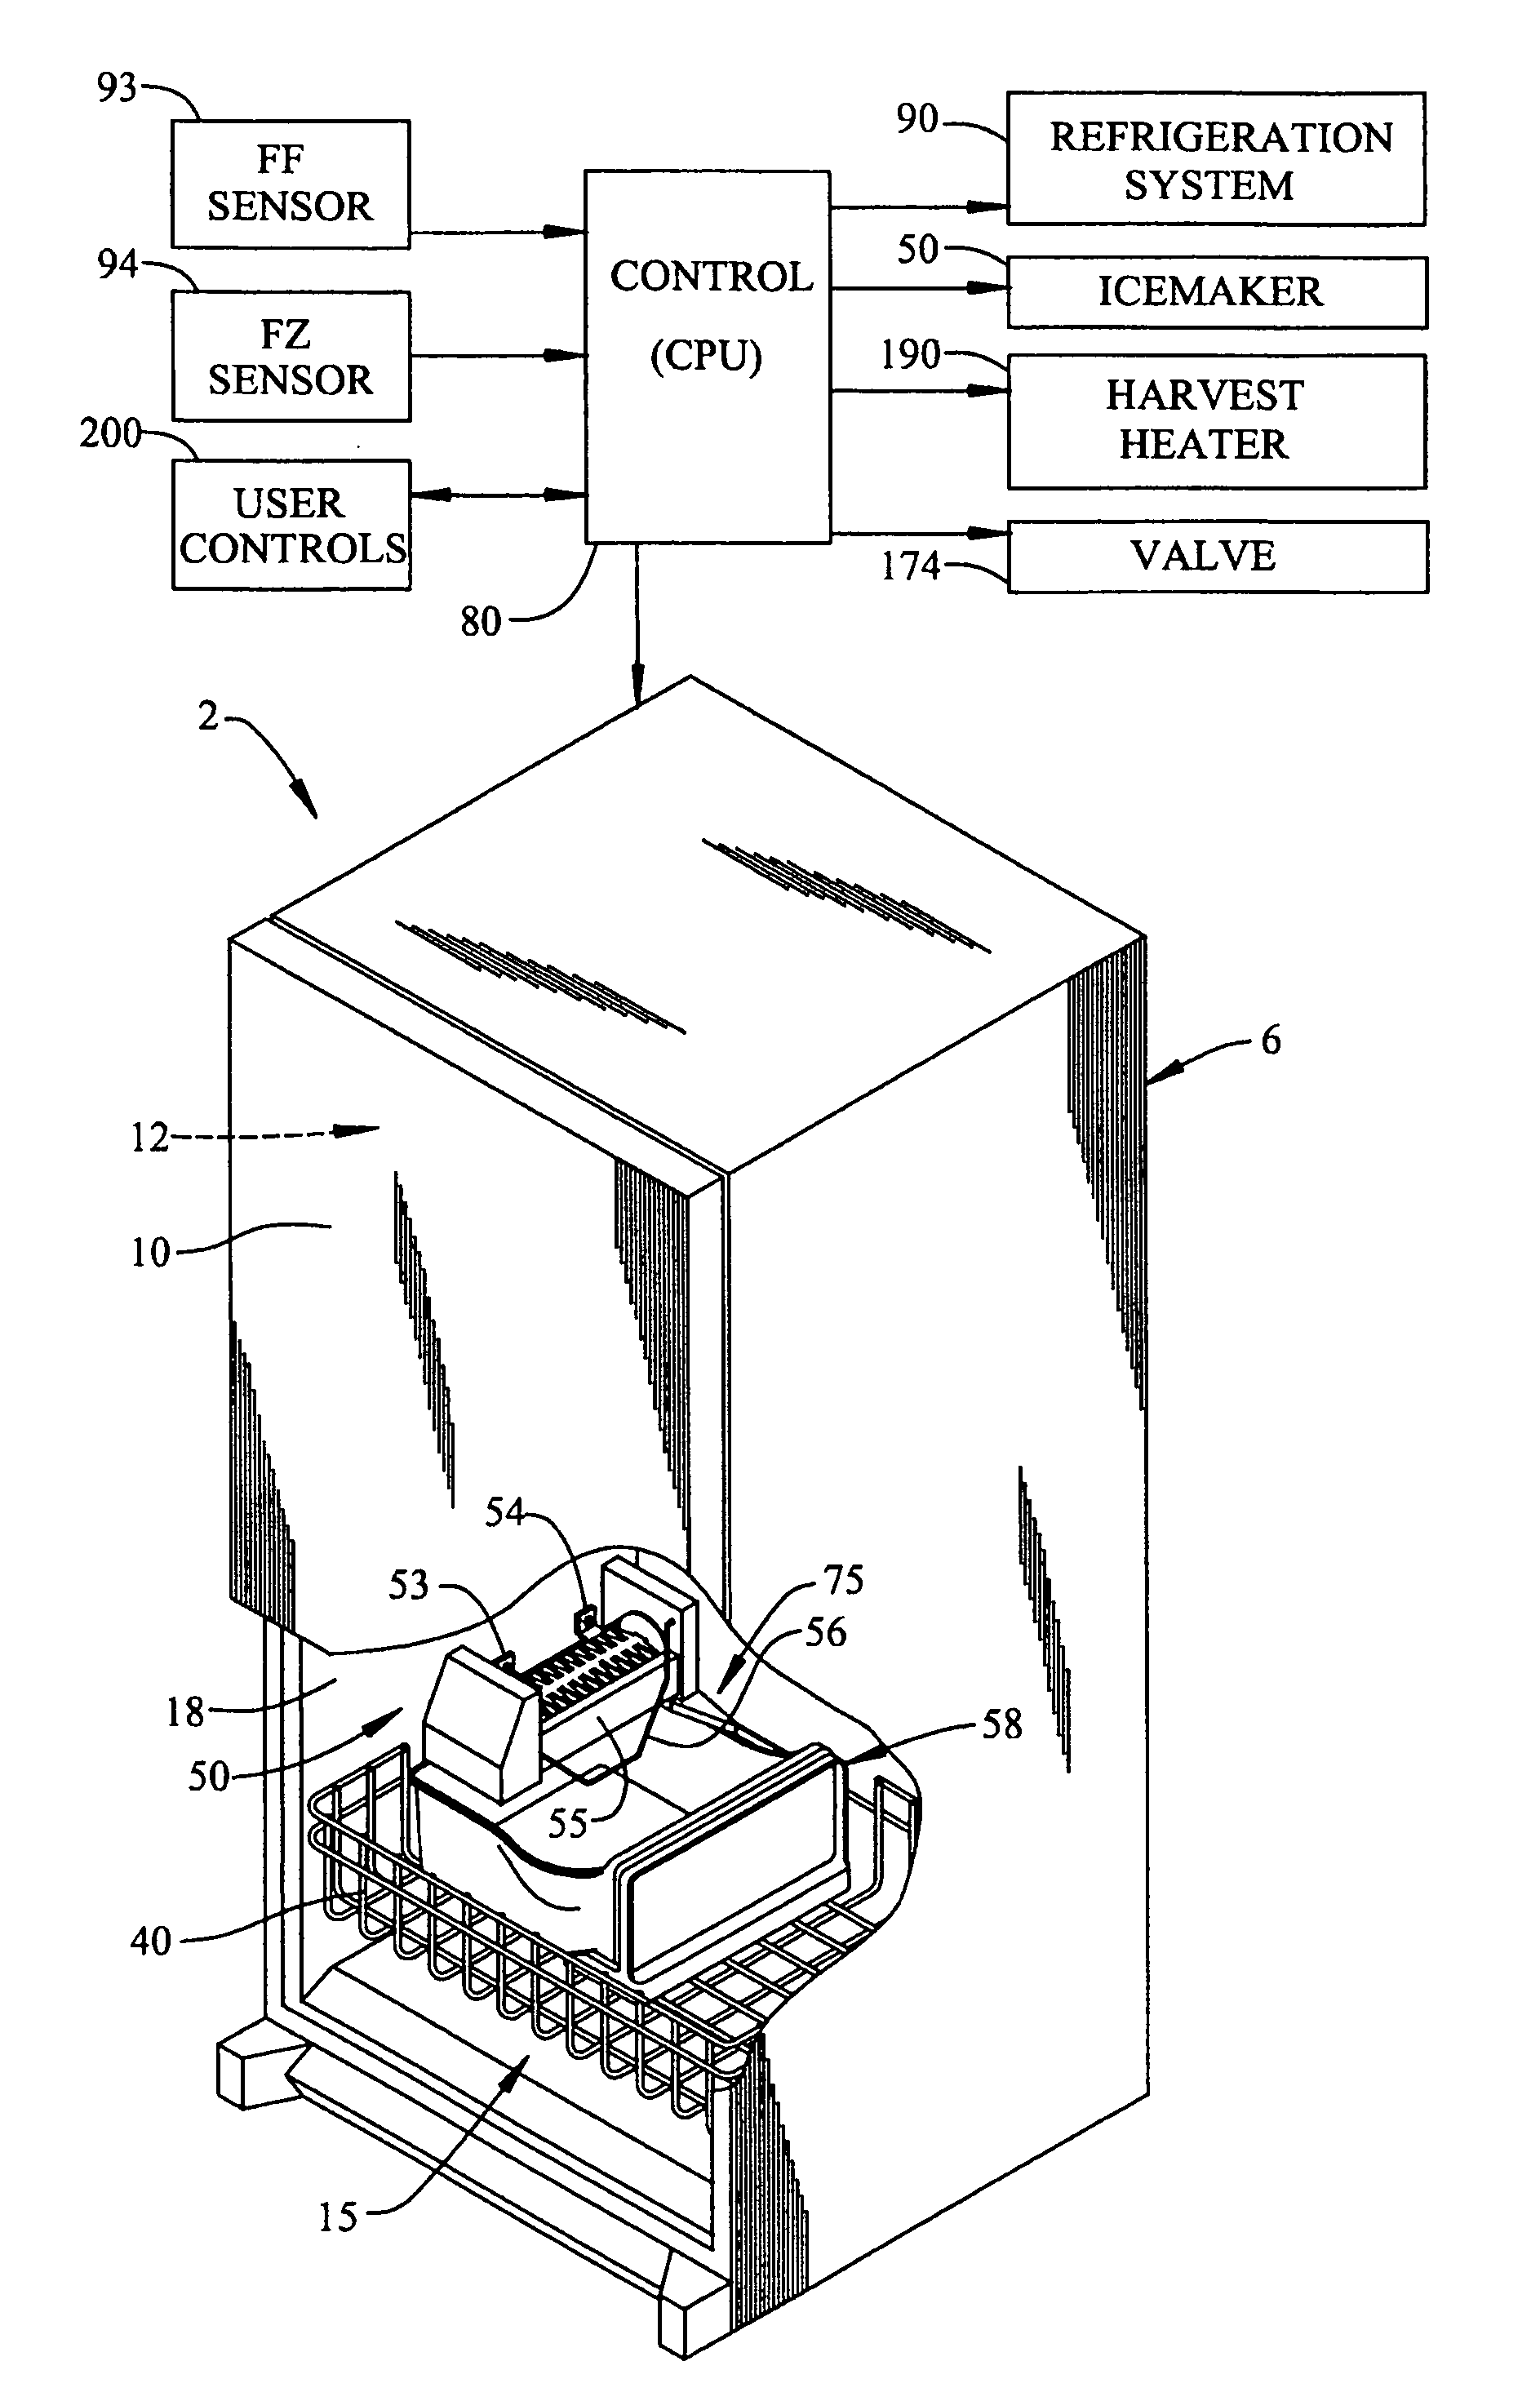 Icemaker system for a refrigerator